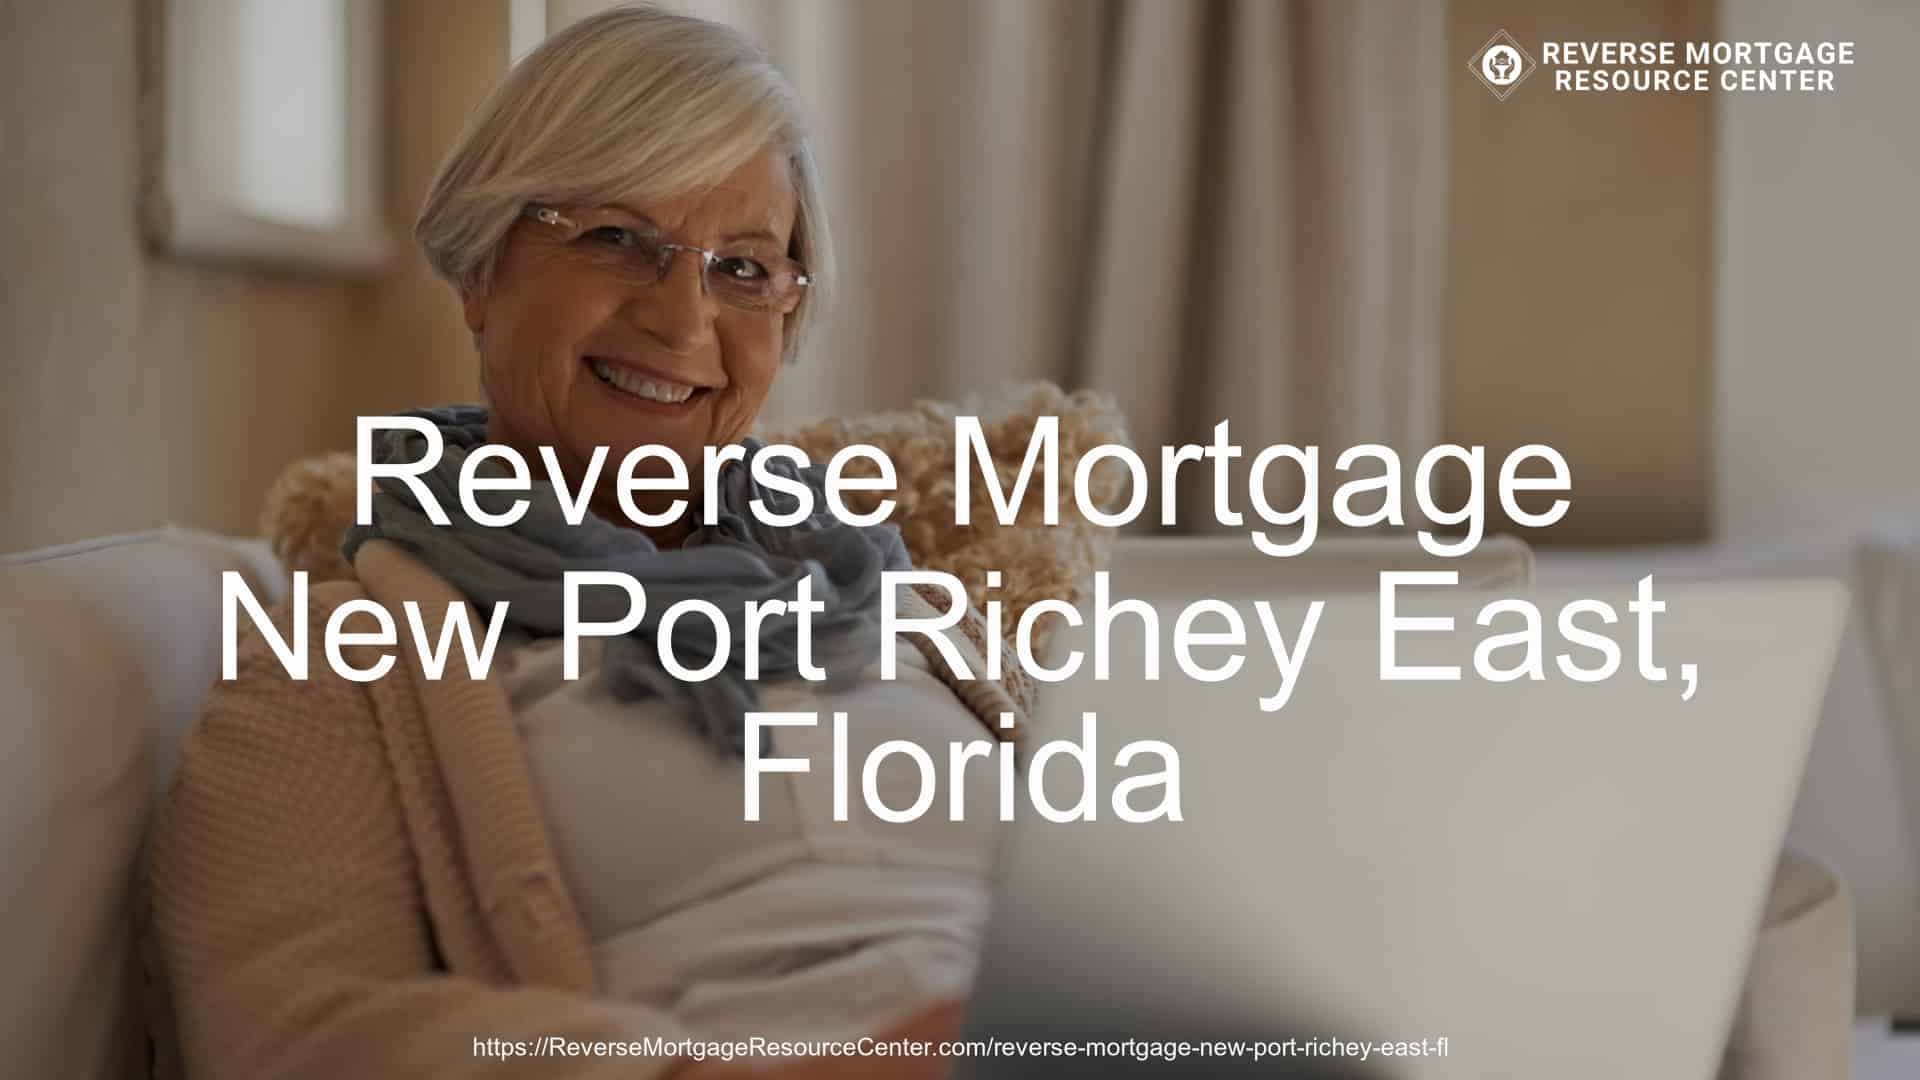 Reverse Mortgage in New Port Richey East, FL